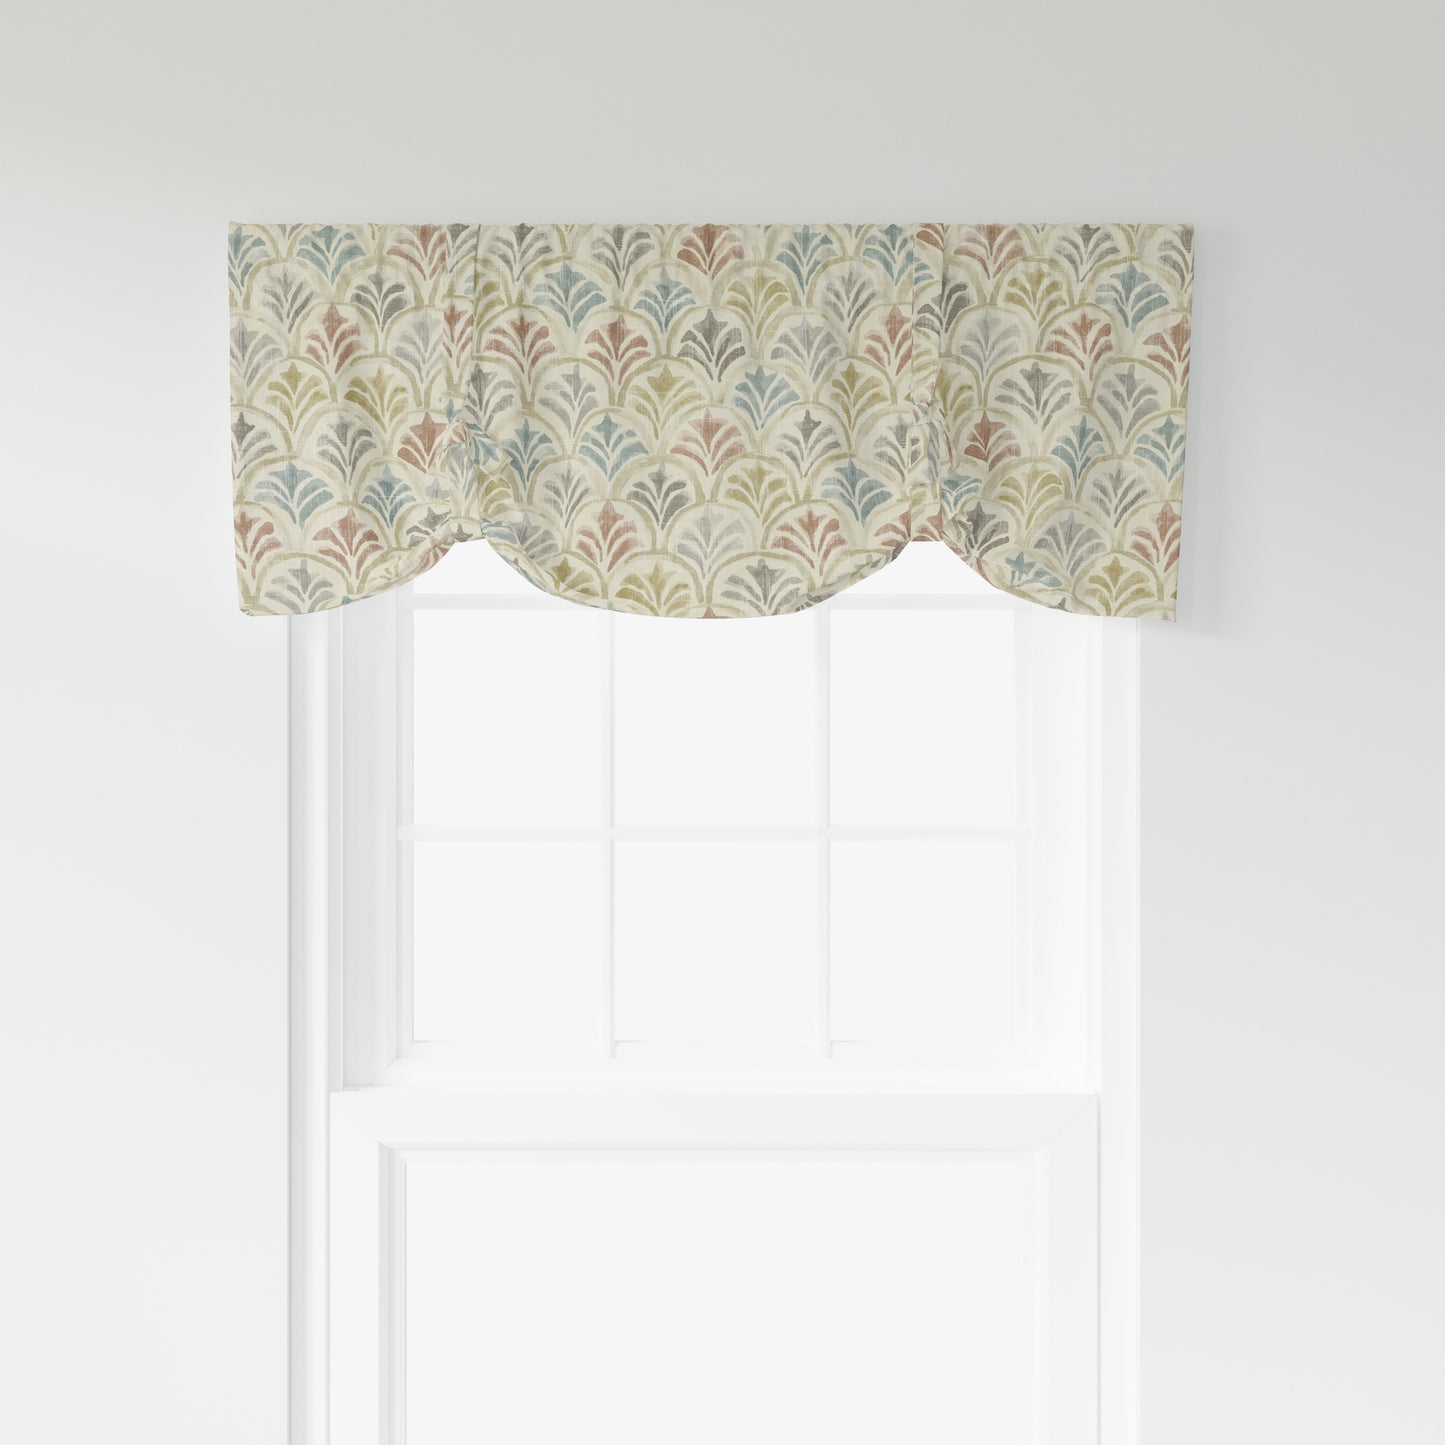 Tie-up Valance in Countess Tuscan Scallop Watercolor- Blue, Terracotta, Gray, Tan